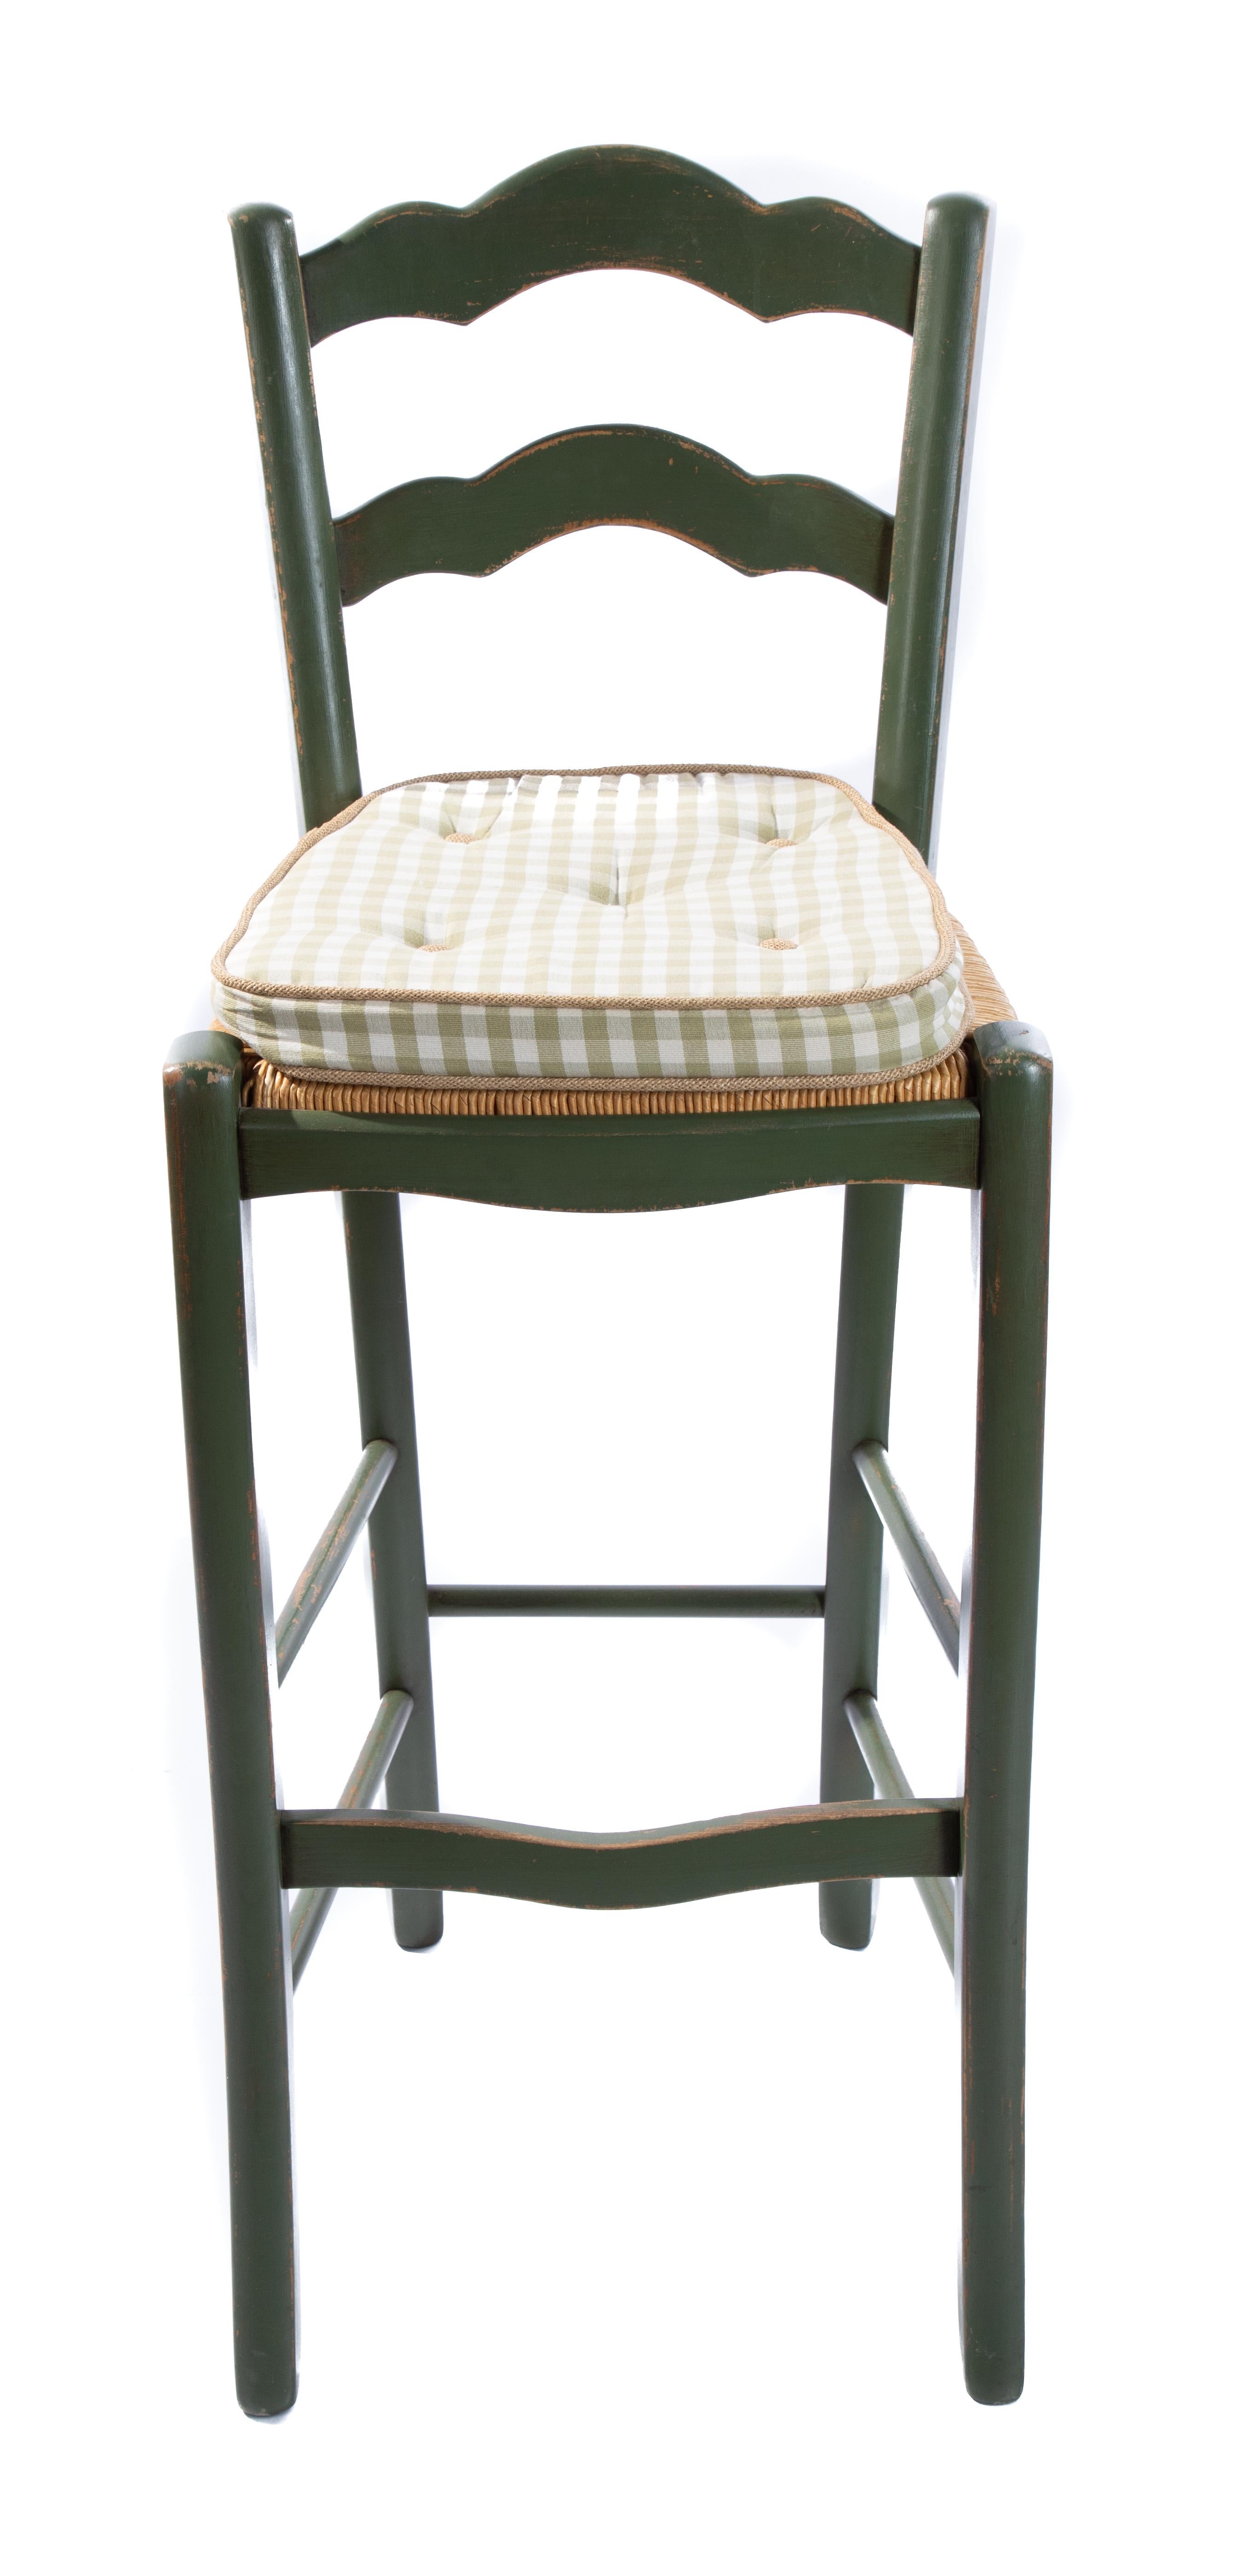 Rococo Italian Barstools with Plaid Seat Cushions For Sale